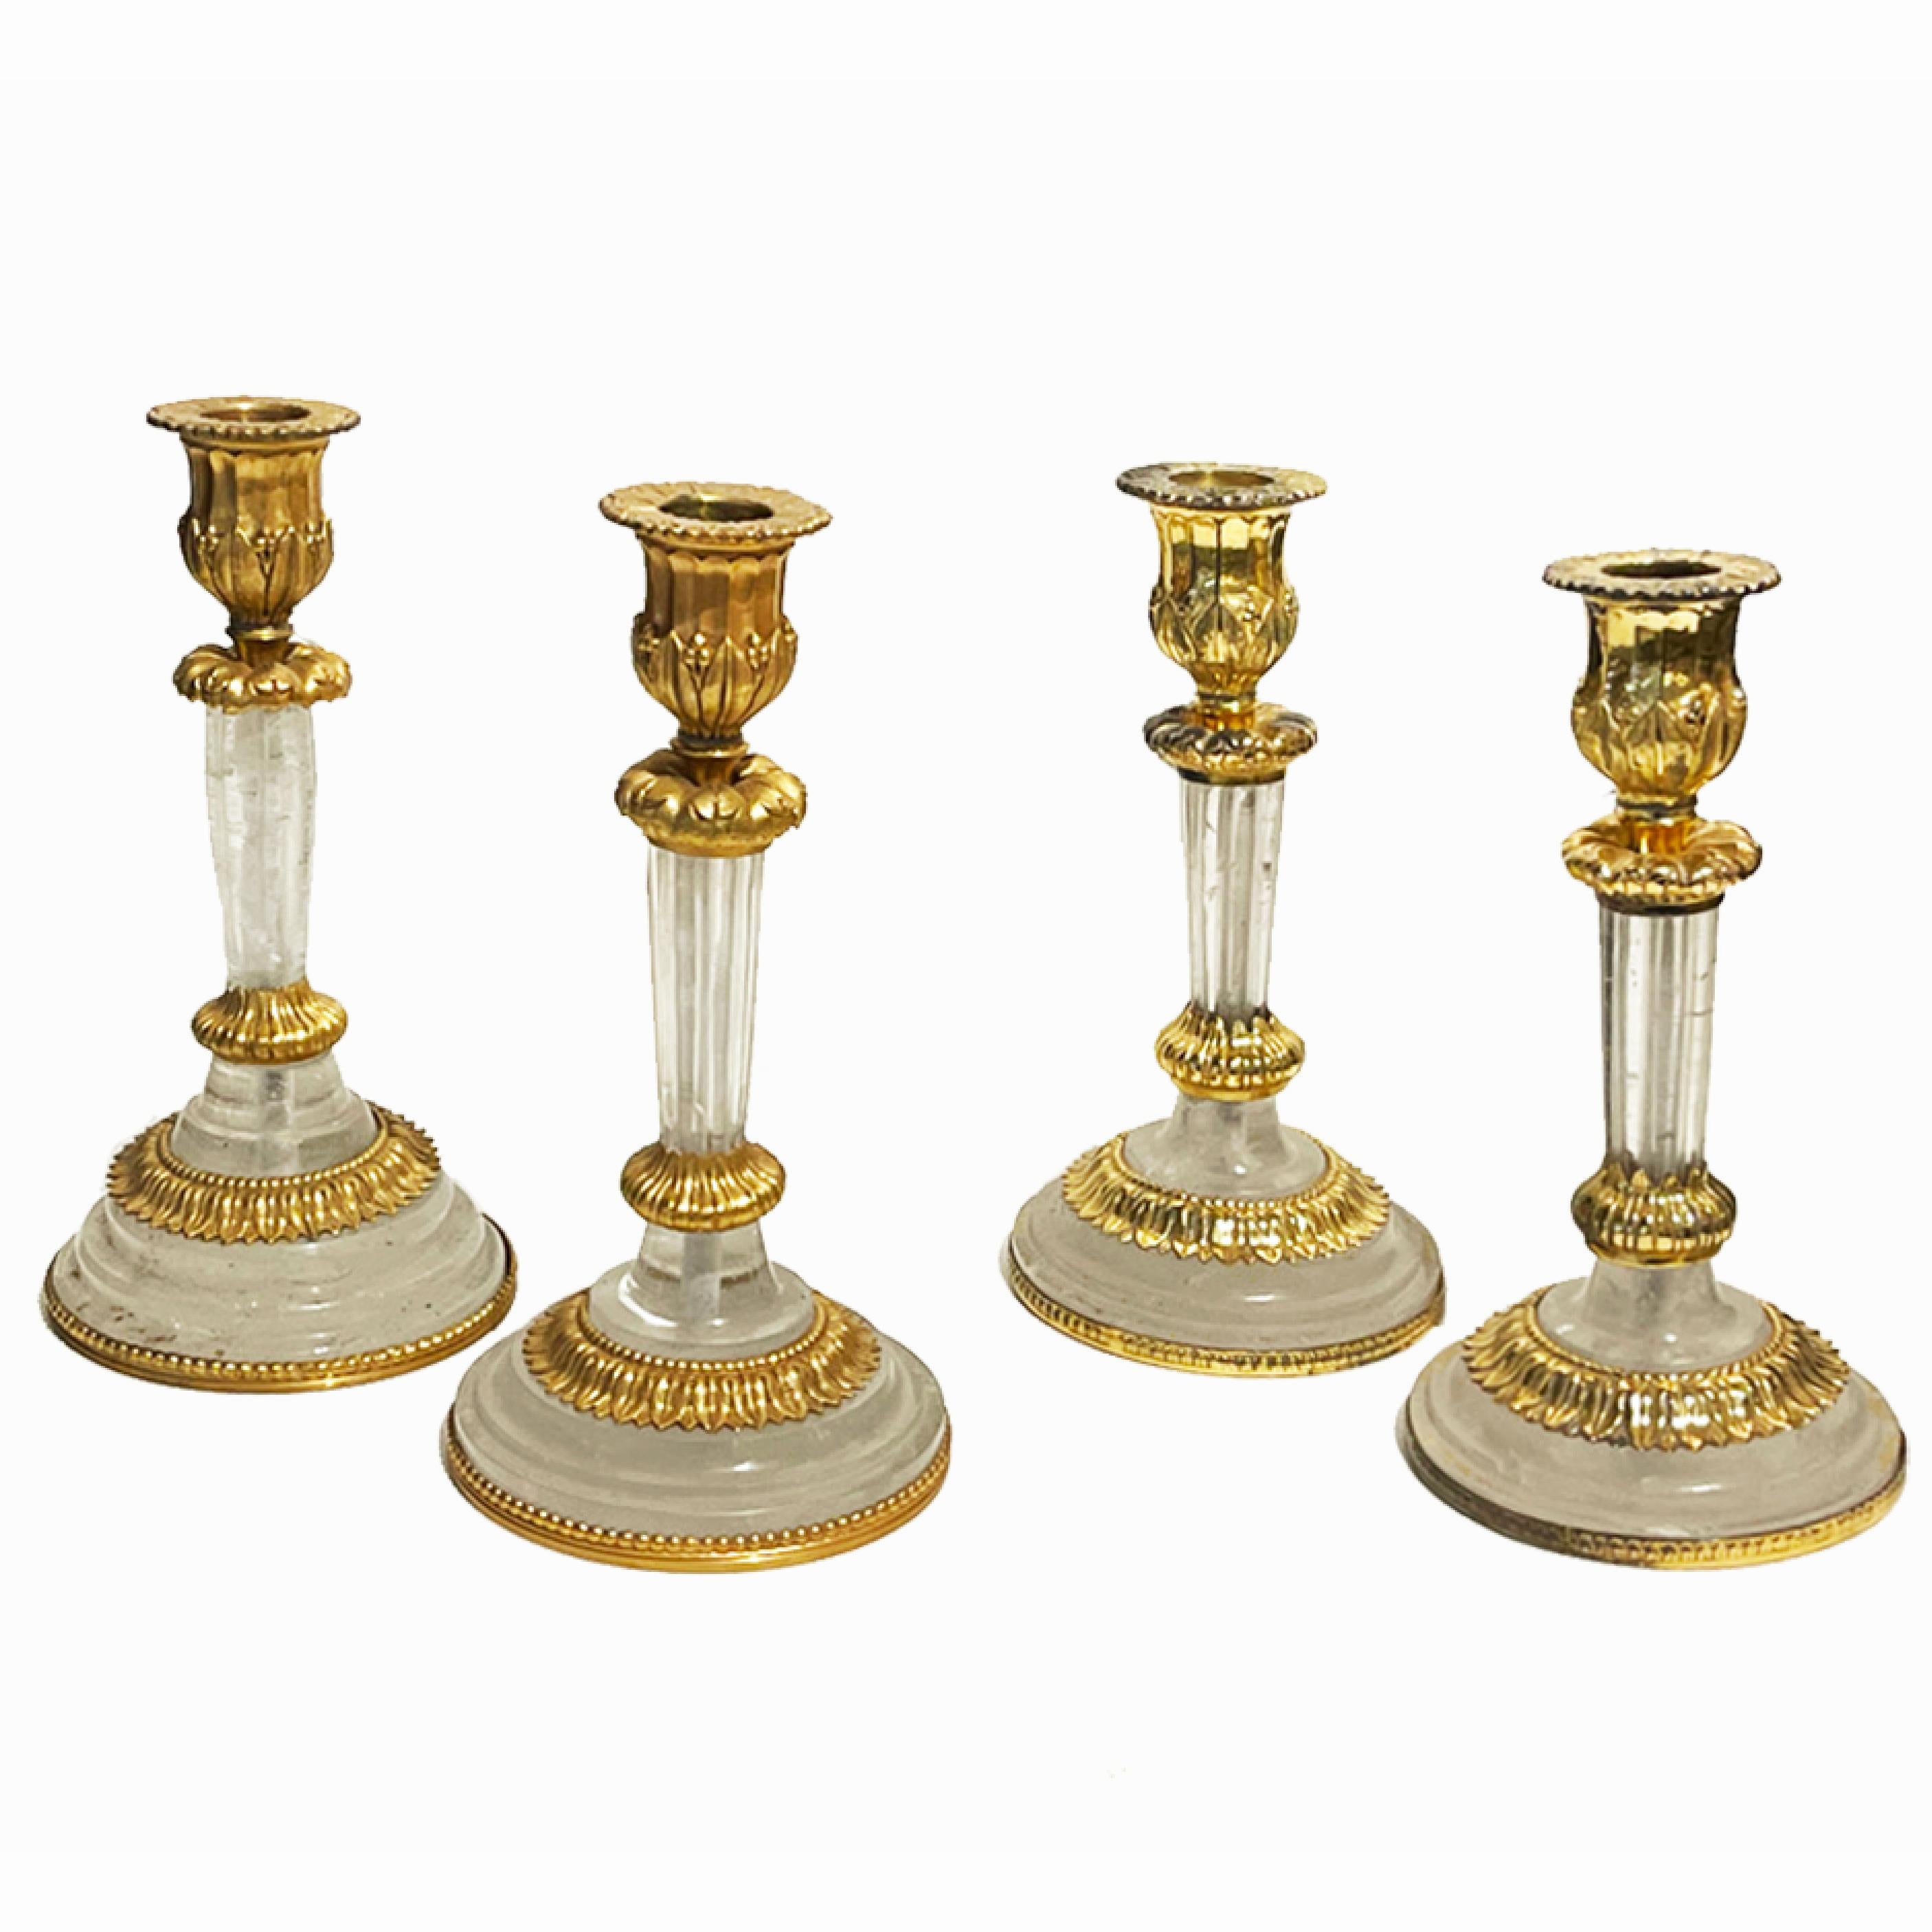 Candlestick Rock Crystal and Gilt Bronze the Pair, 18th Century Style For Sale 2